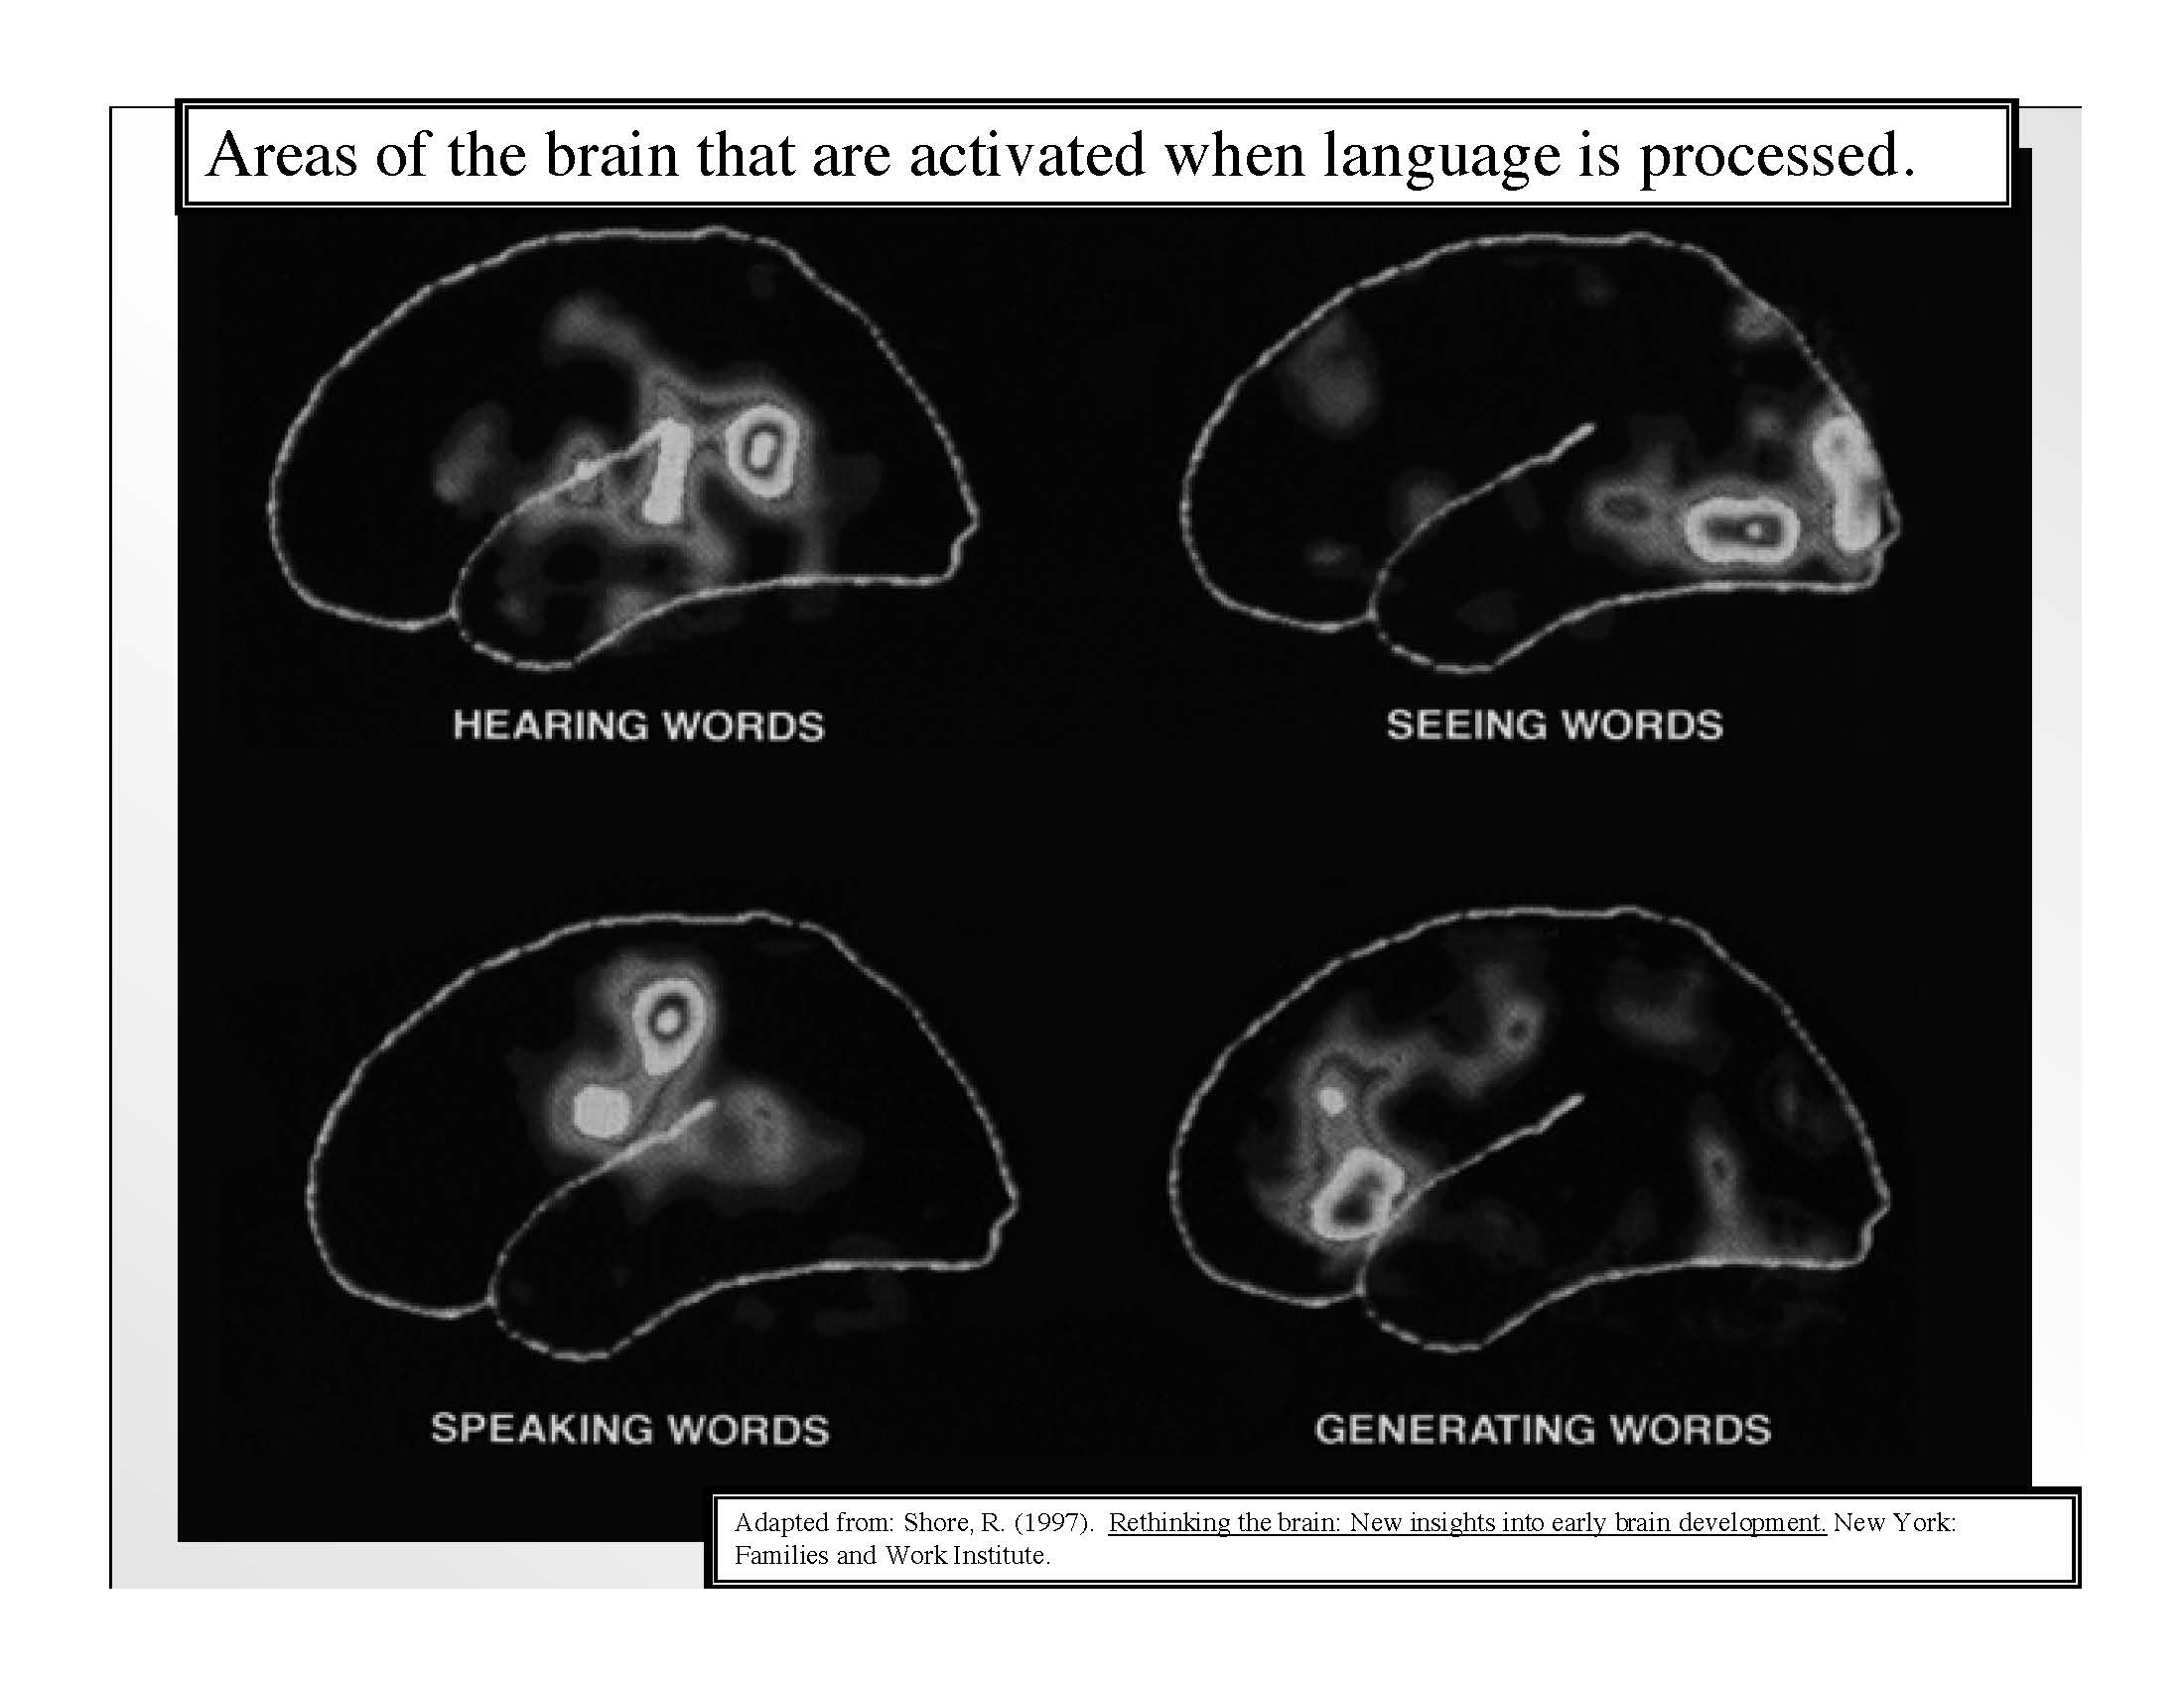 "Areas of the brain that are activated when language is processed"